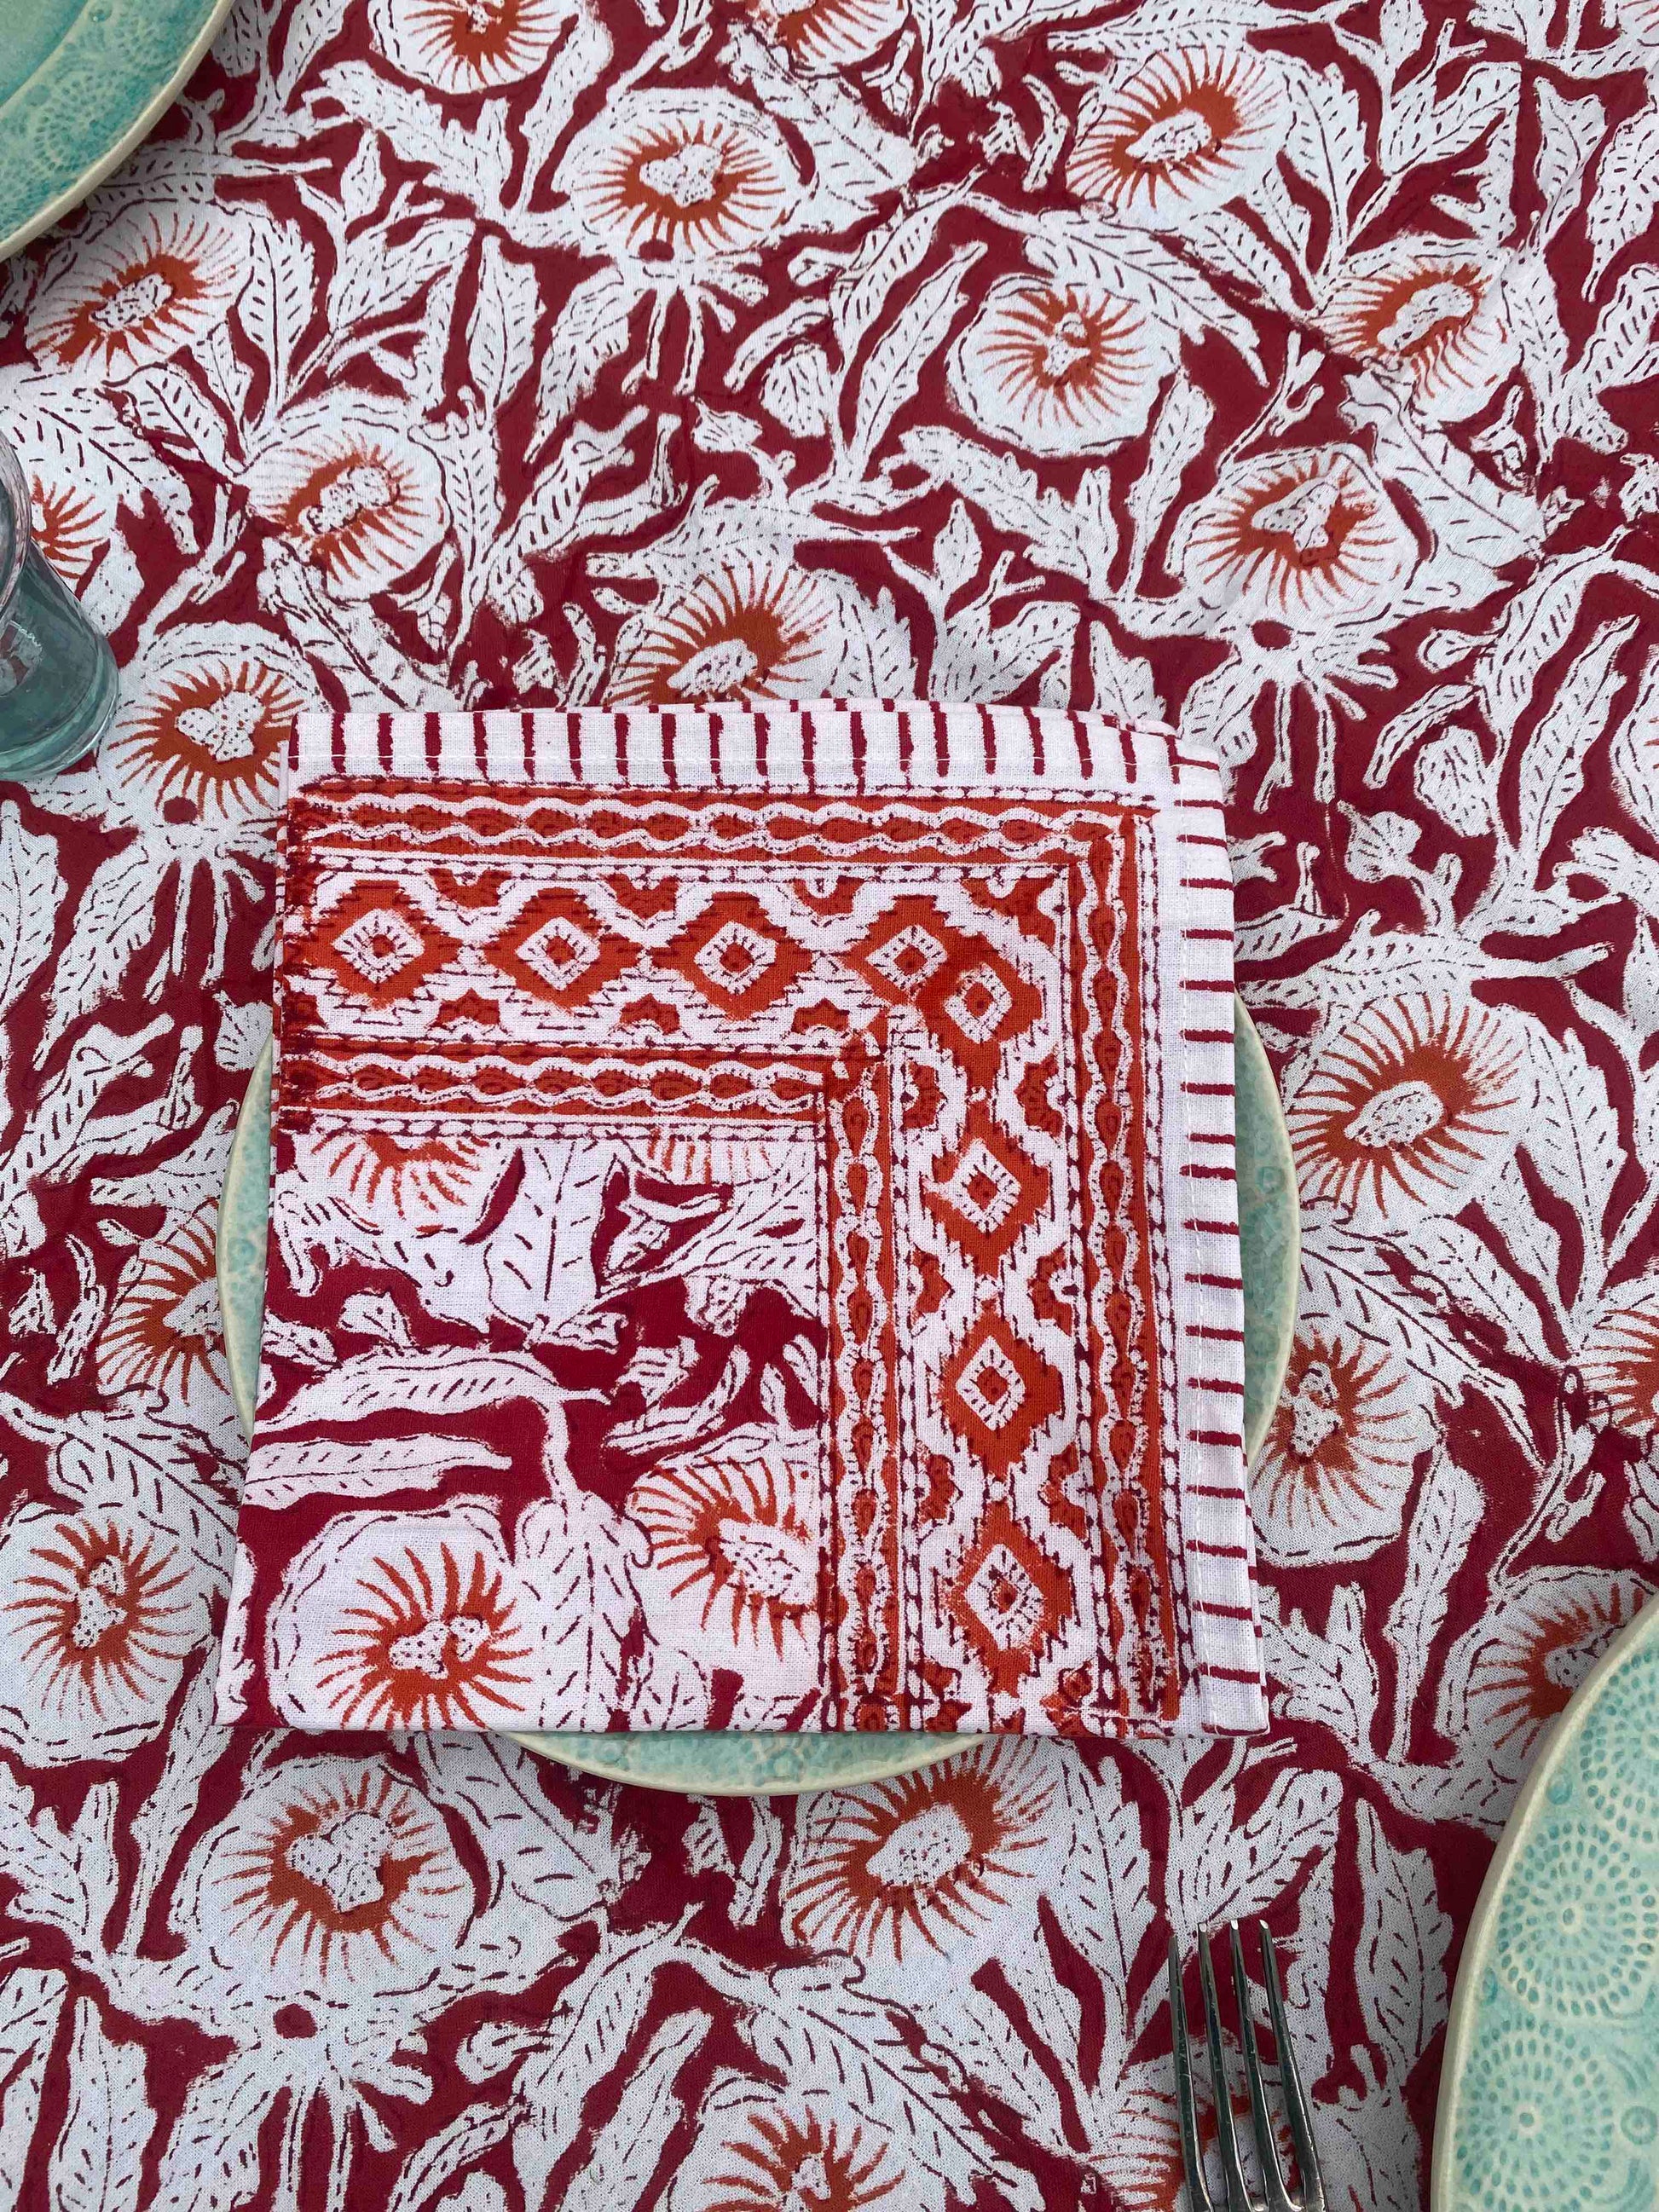 Red and orange tablecloth and napkins